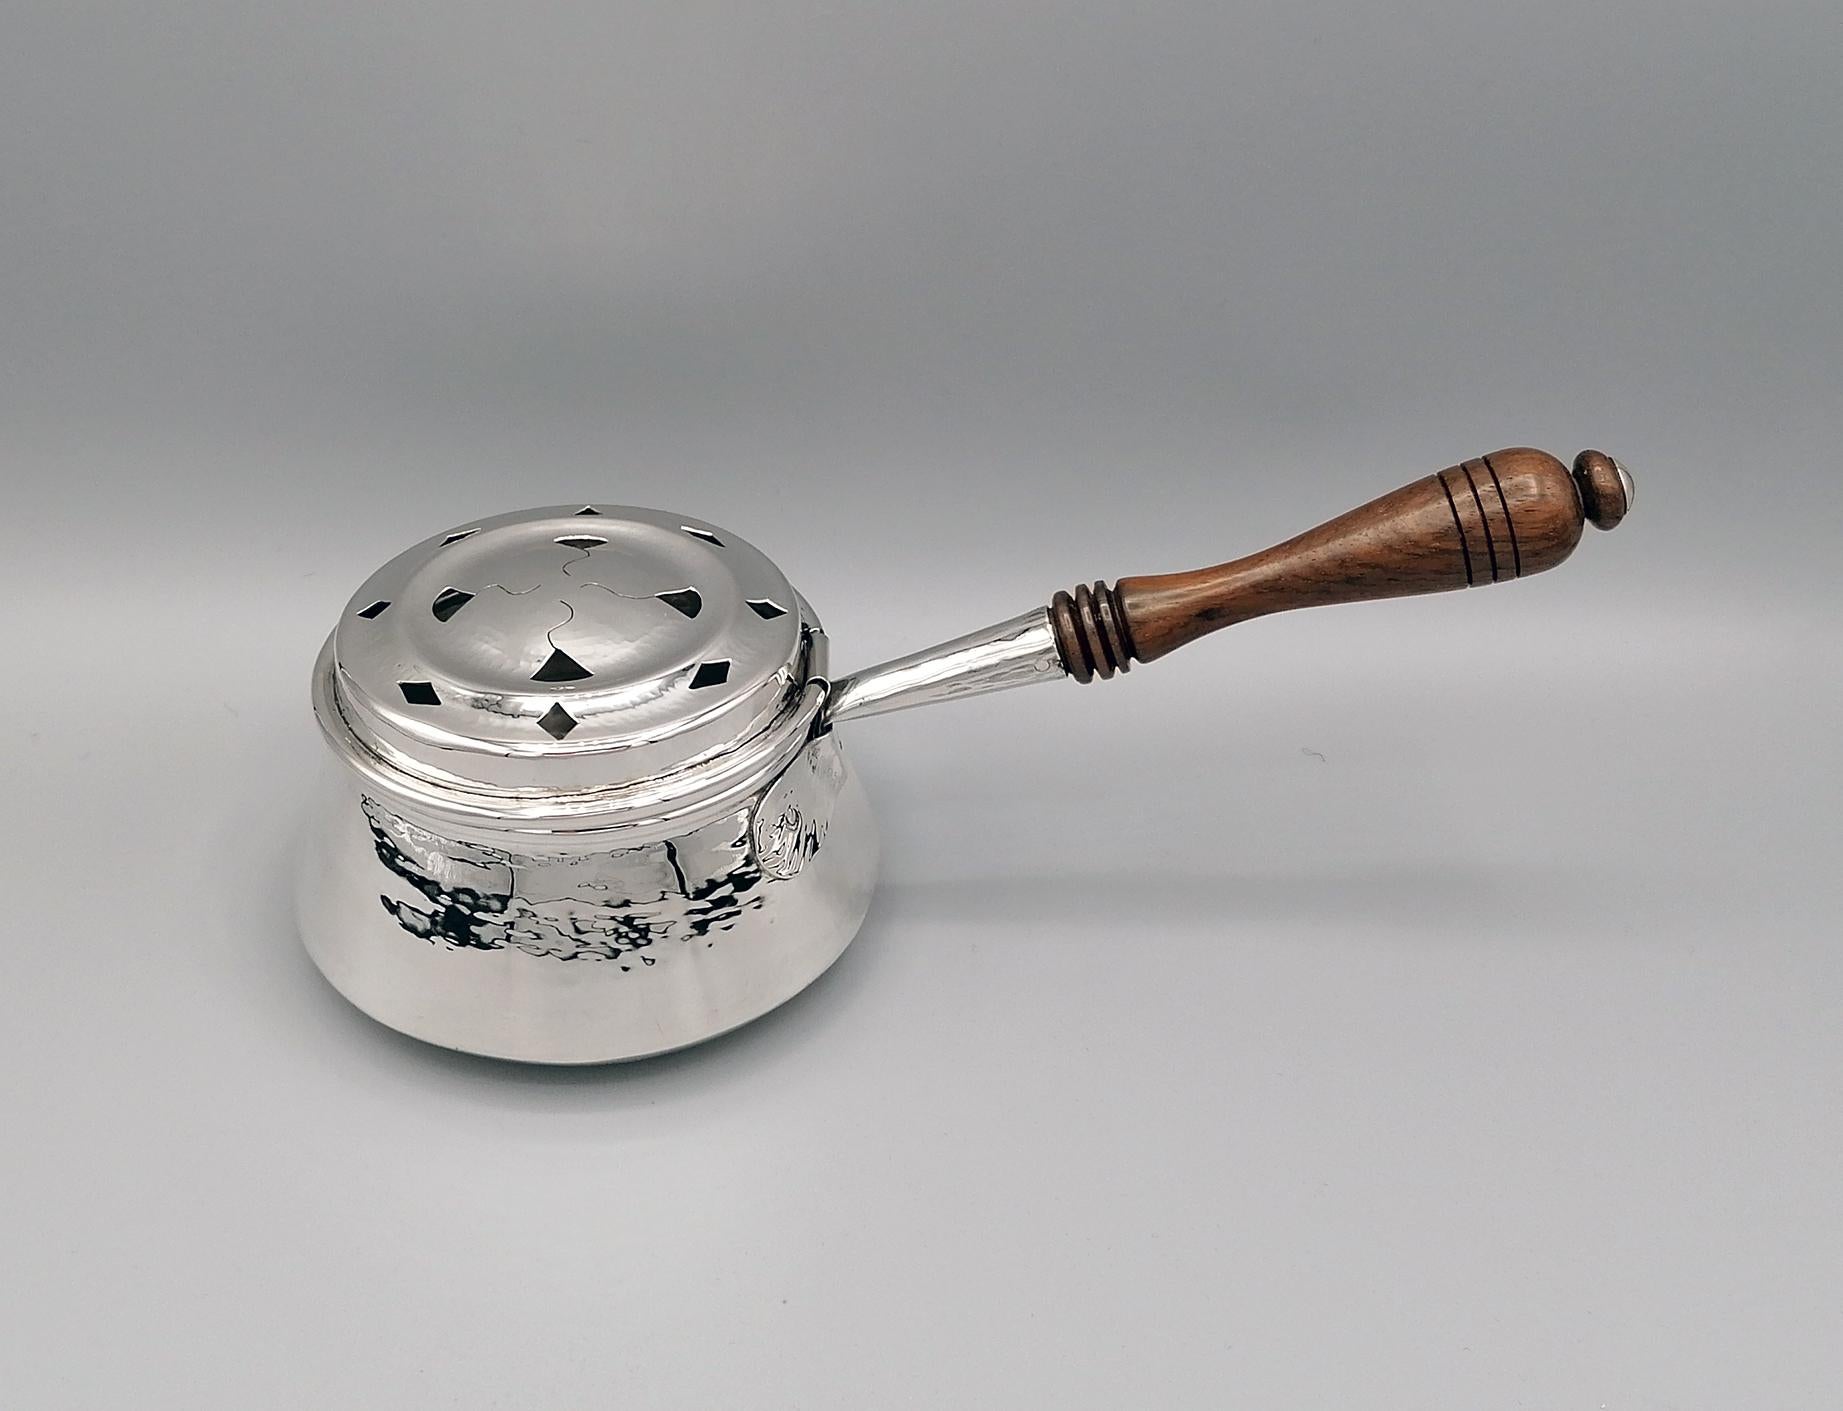 Round conical shape warmer in 800 solid silver. The silver sheet is hammered.
The hinged lid has been pierced by hand with holes in the shape of a rhombus and triangle.
The wooden handle is fixed to the body of the warmer with a silver support